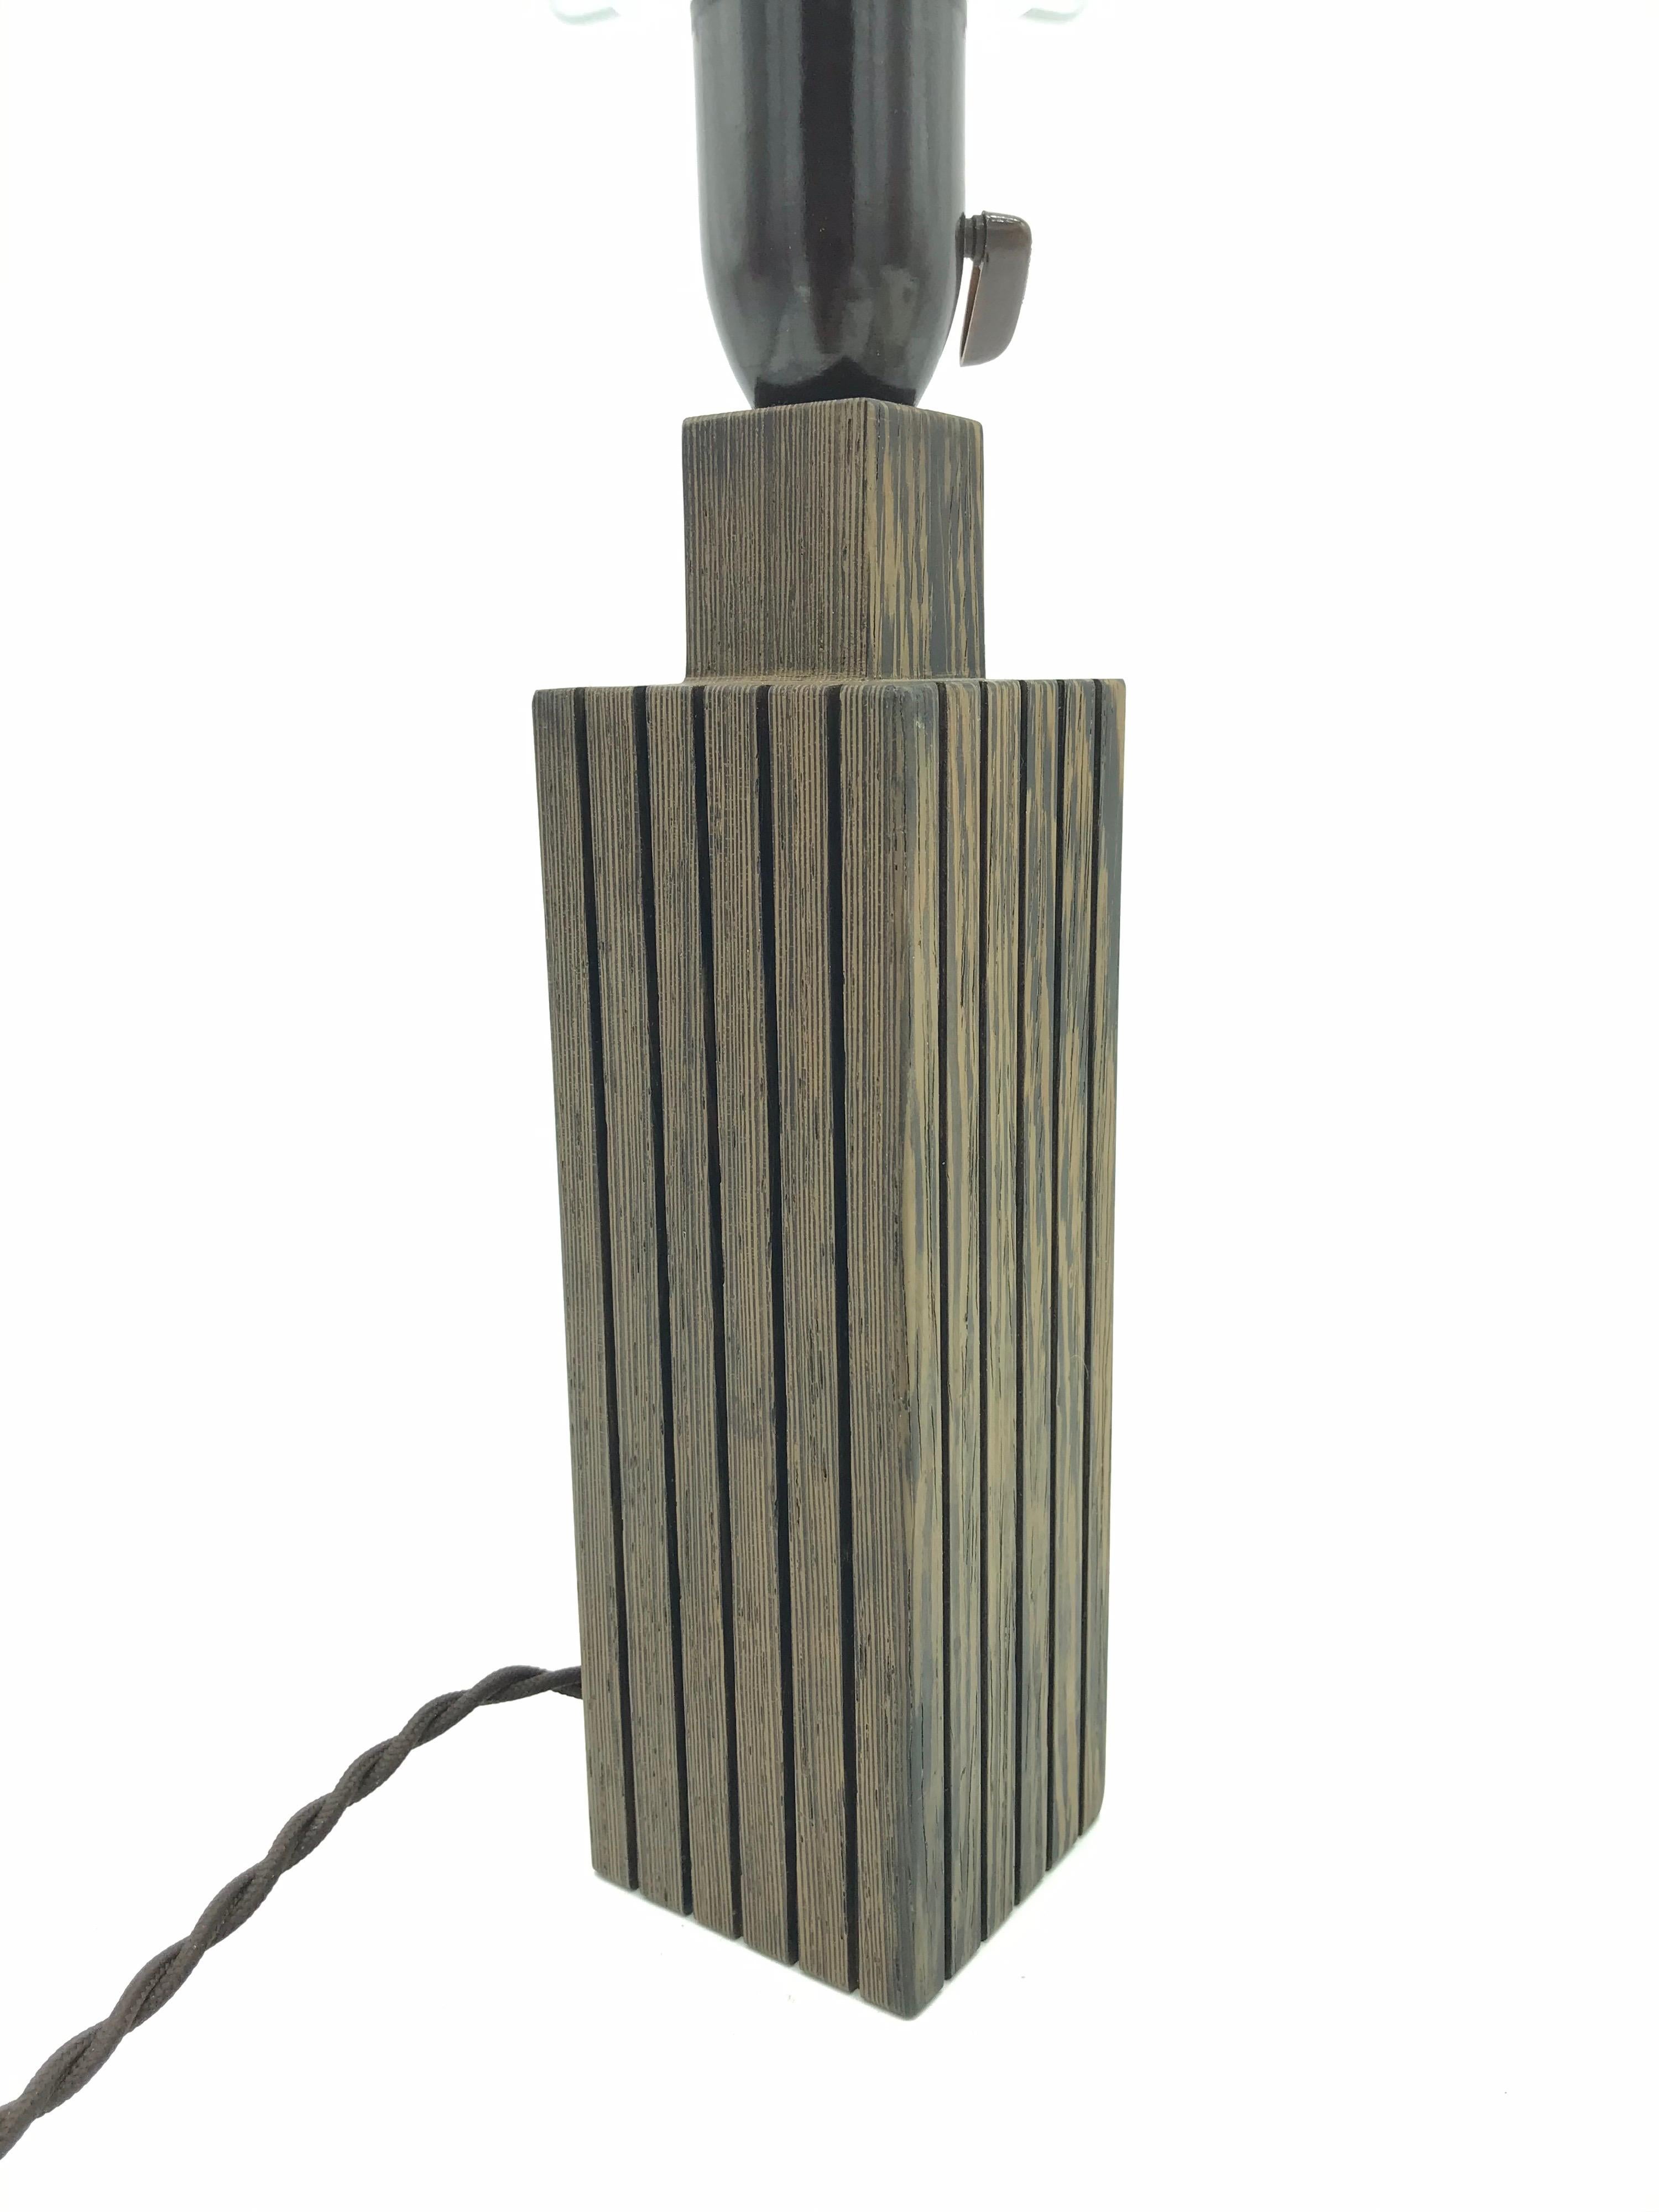 Vintage Mid-Century Modern Mahogany Table Lamp with an ArtbyMay Lamp Shade In Good Condition For Sale In Søborg, DK